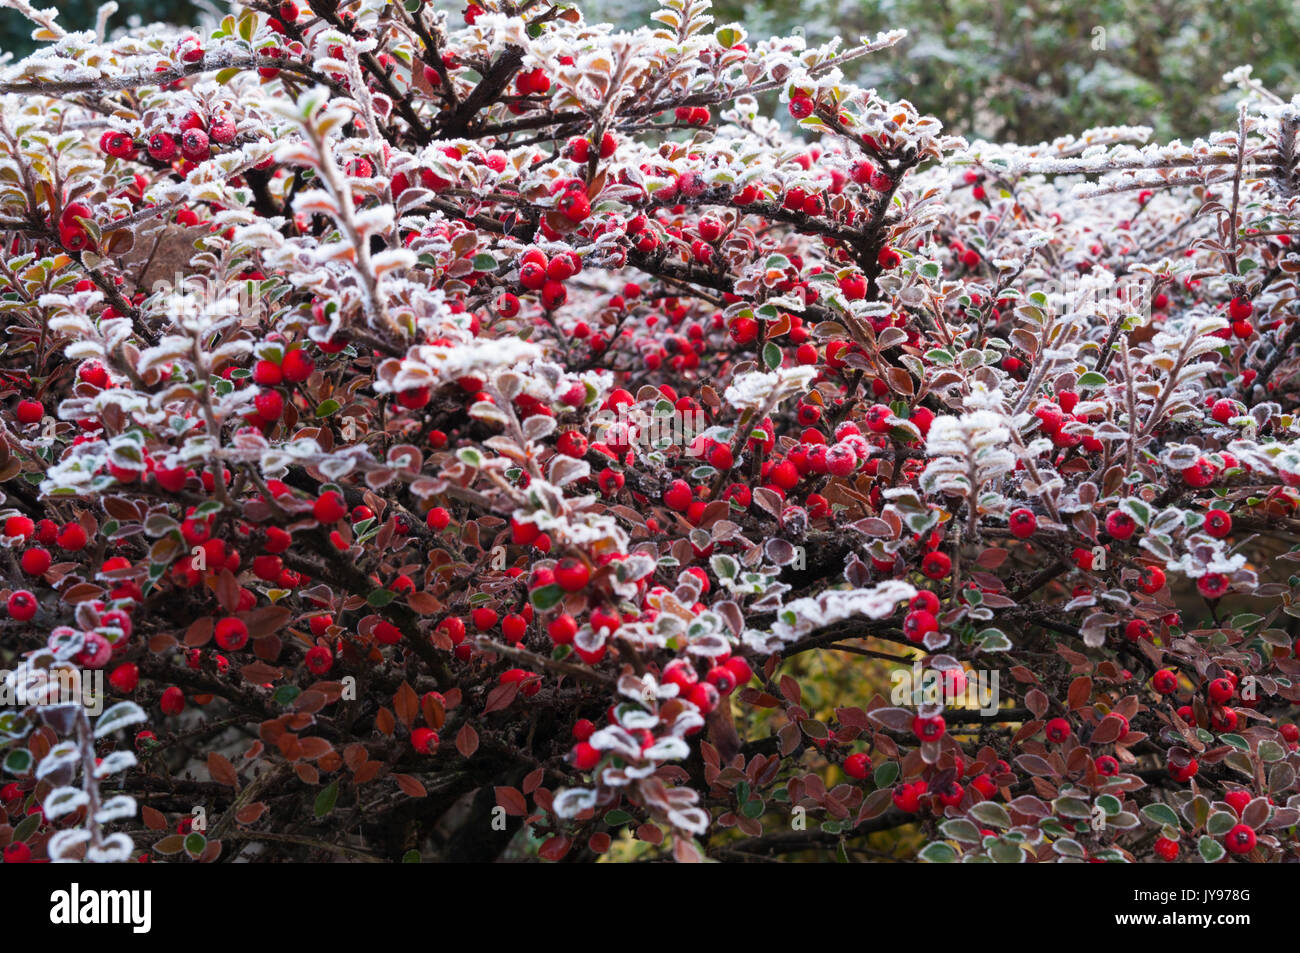 Bright red cotoneaster berries and delicate leaves coated in hoar frost on a cold December morning in a British garden. Stock Photo